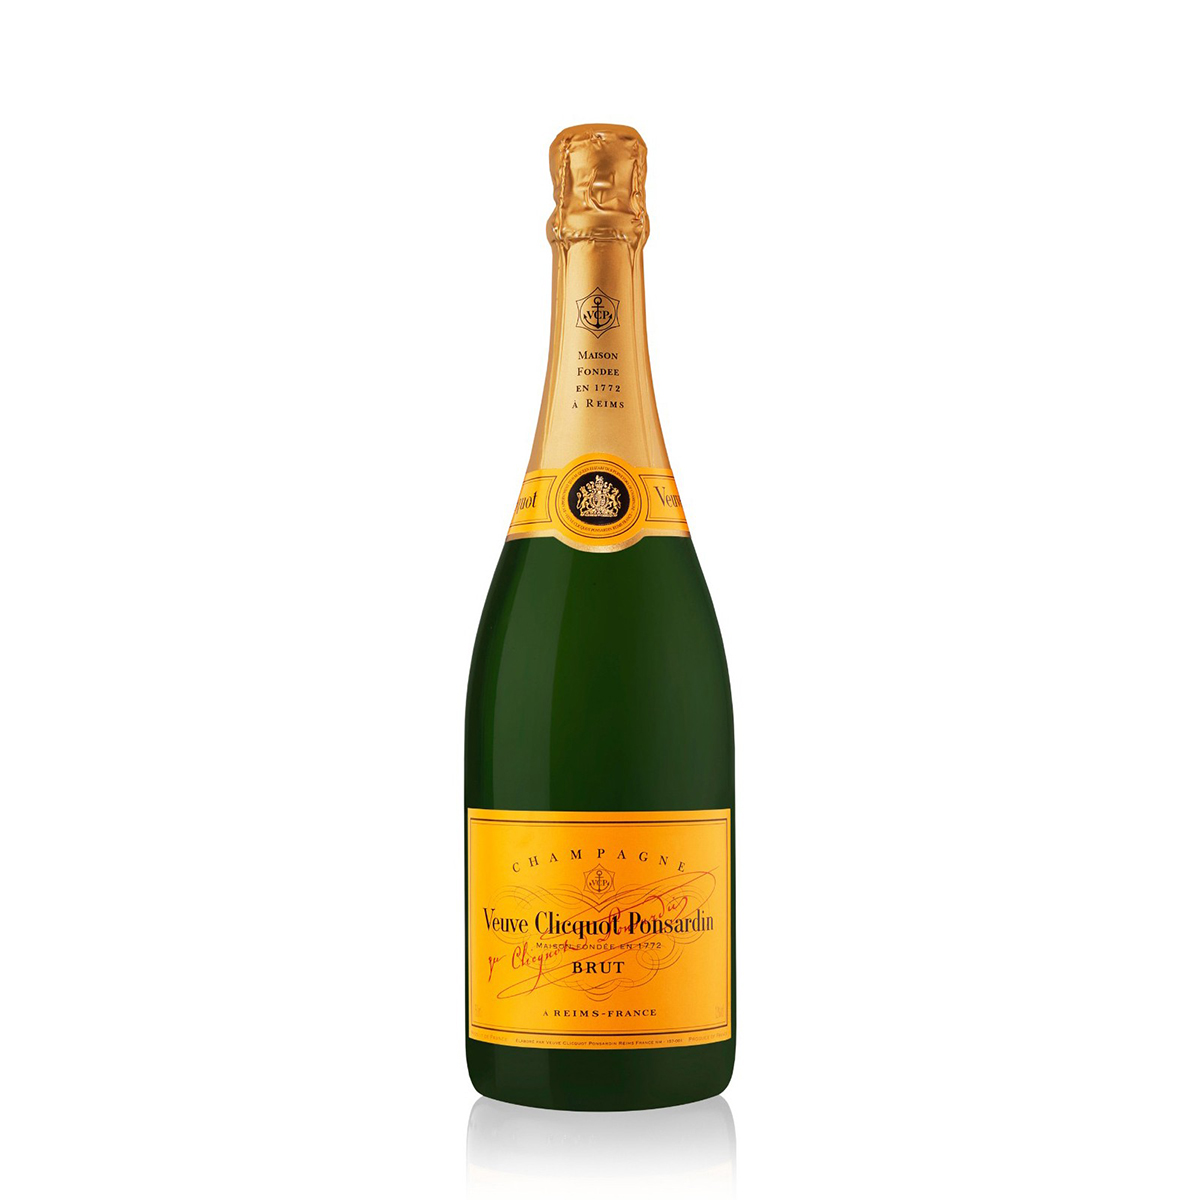 Thursday Champagne Party – Yelloween with Veuve Clicquot – West Village